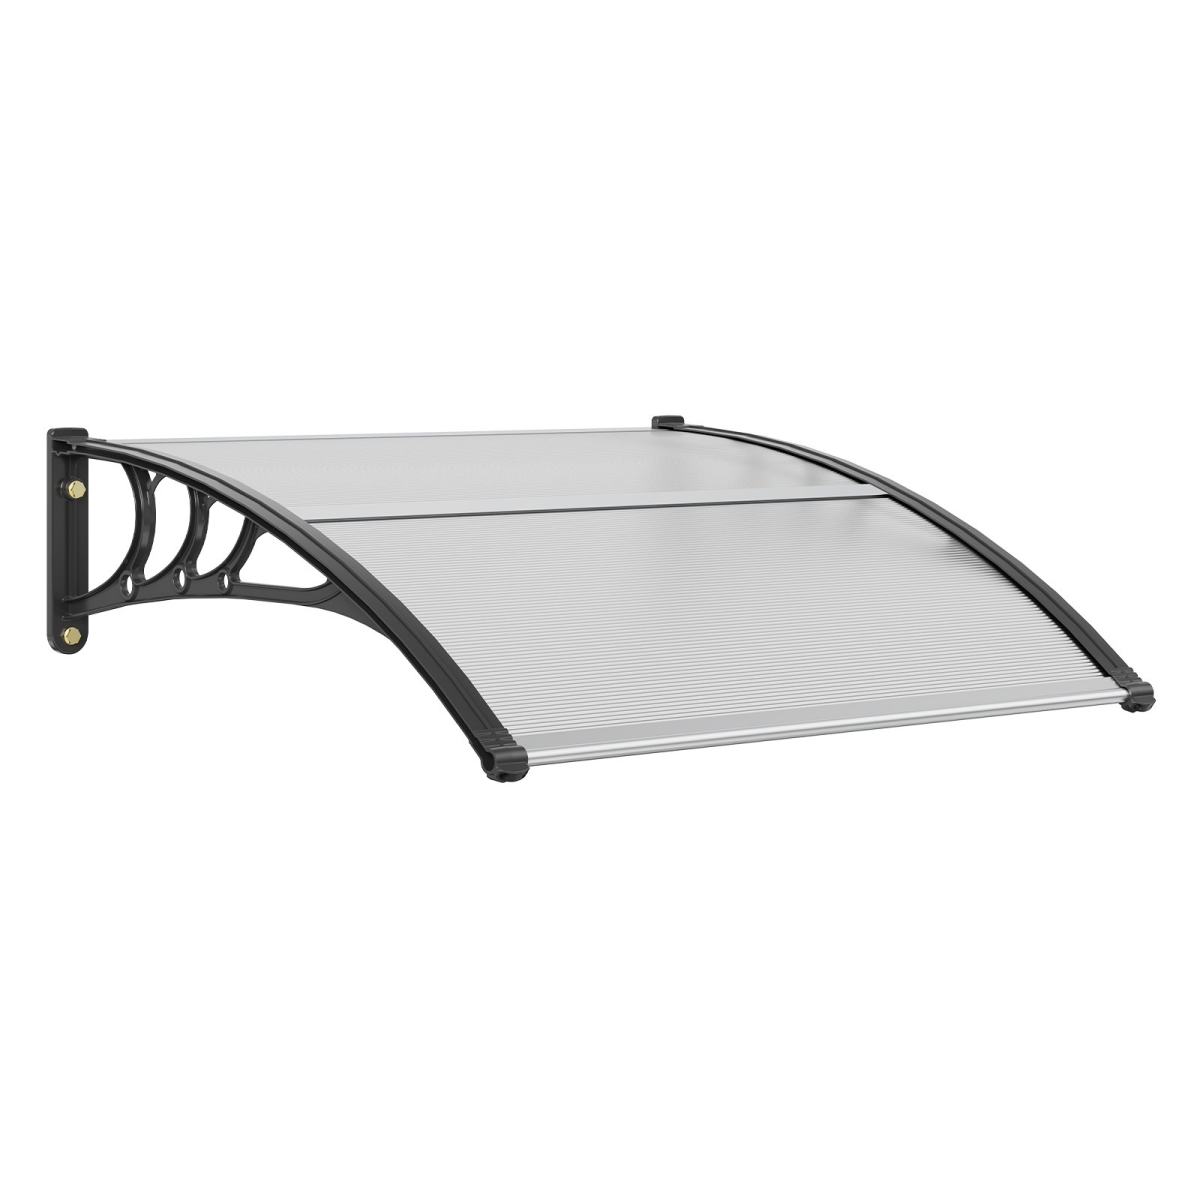 Picture of Vevor MCZYPYCBS4040ML75V0 40 x 40 in. Window Door Awning Canopy